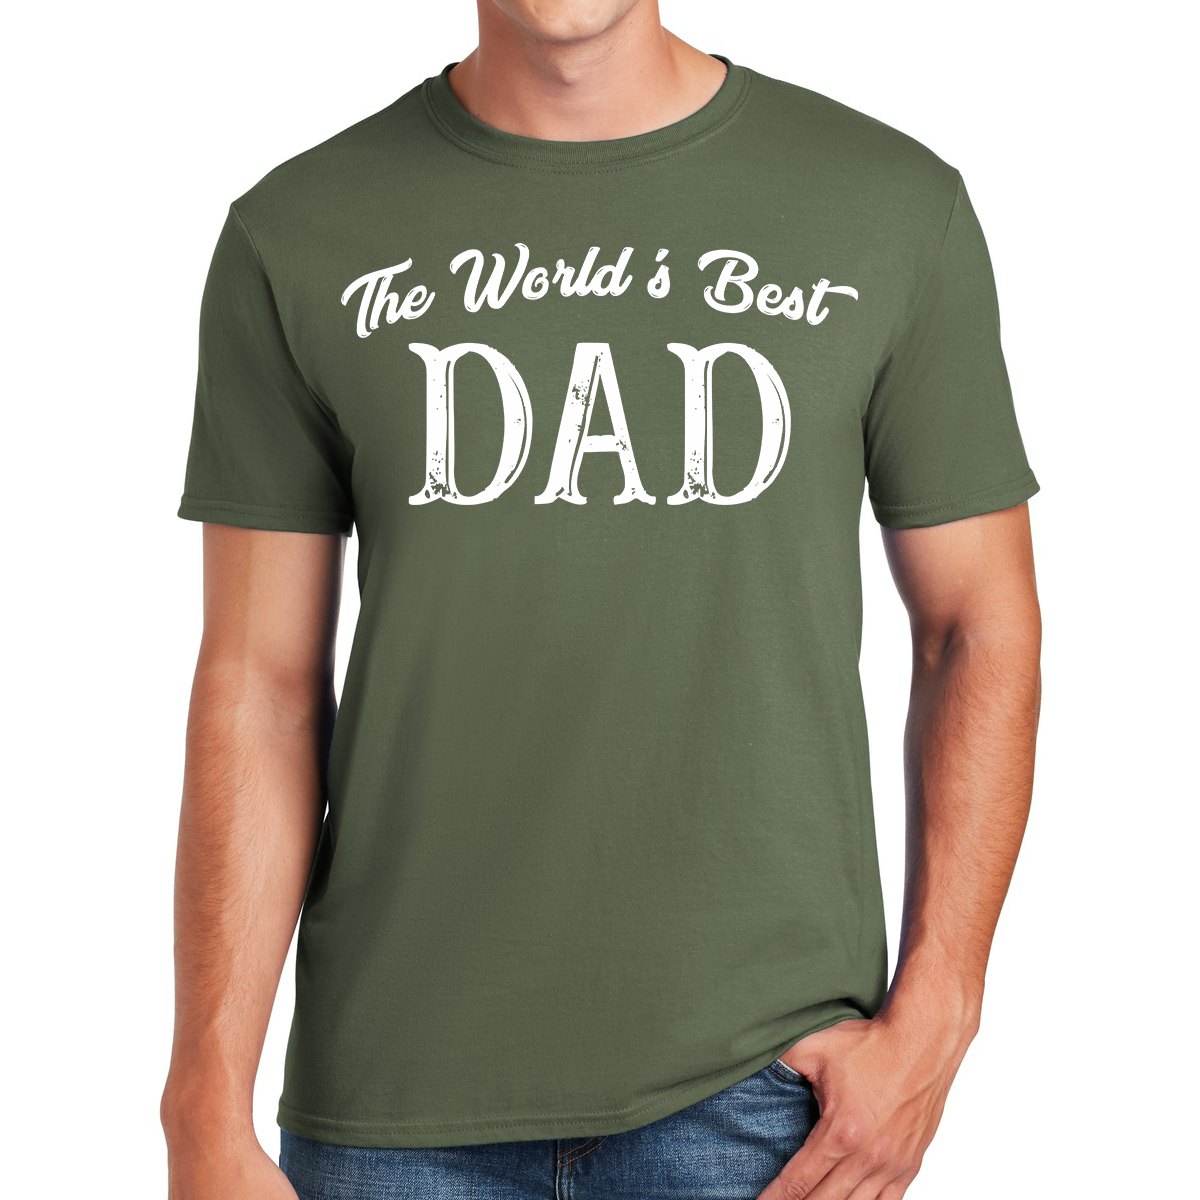 The World's Best Dad Wear It Proudly Awesome Dad T-shirt